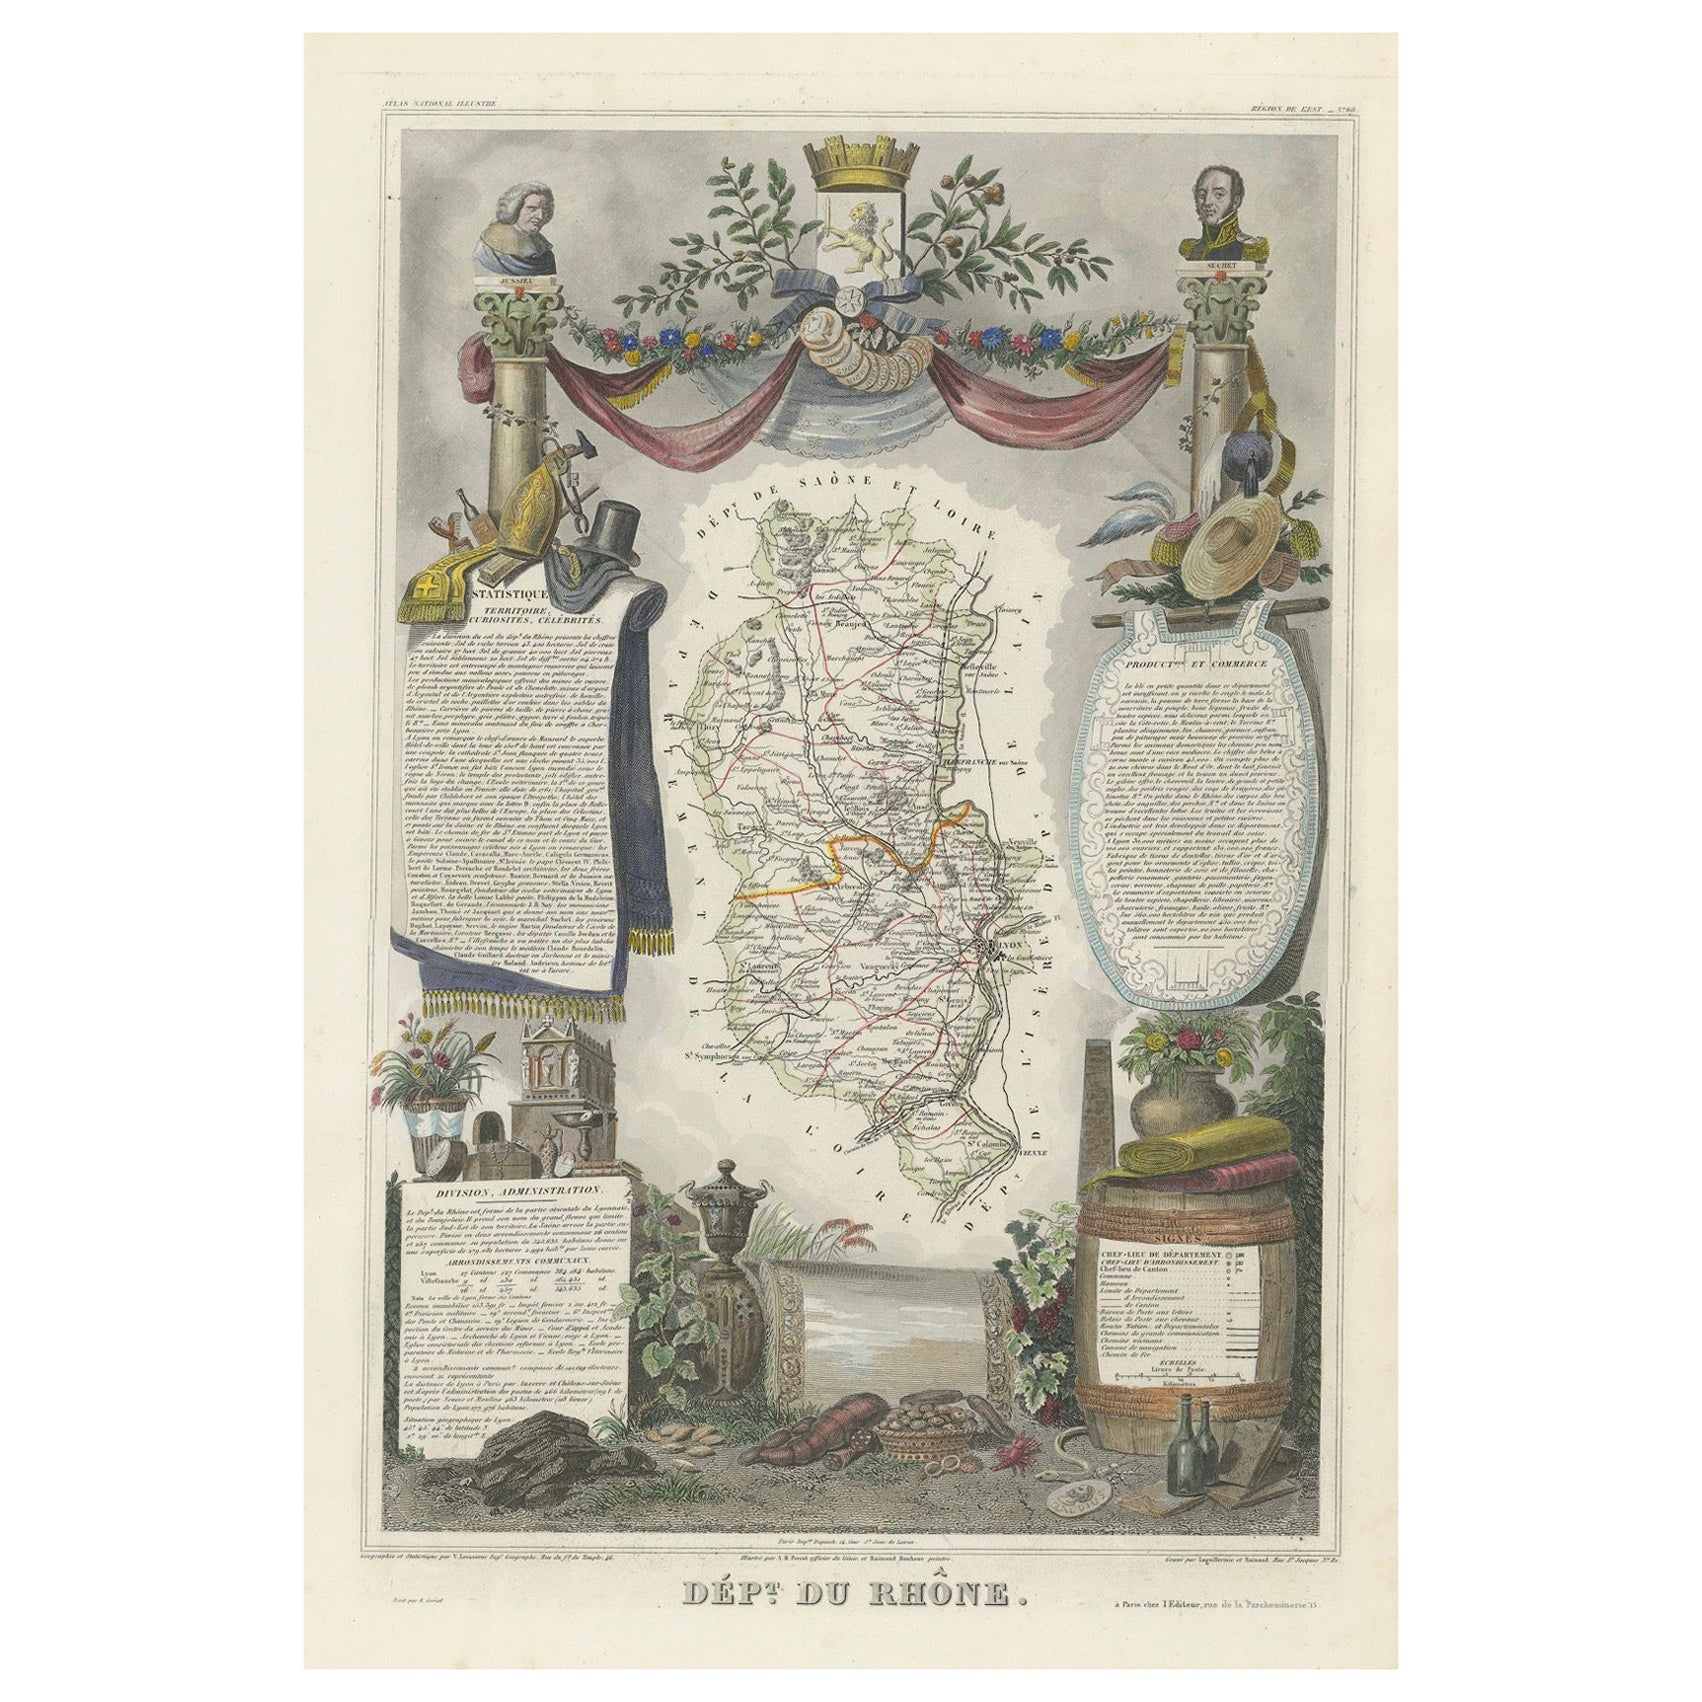 Map of Rhône: Culture and Commerce in Lyon's Silk and Wine Legacy, 1852